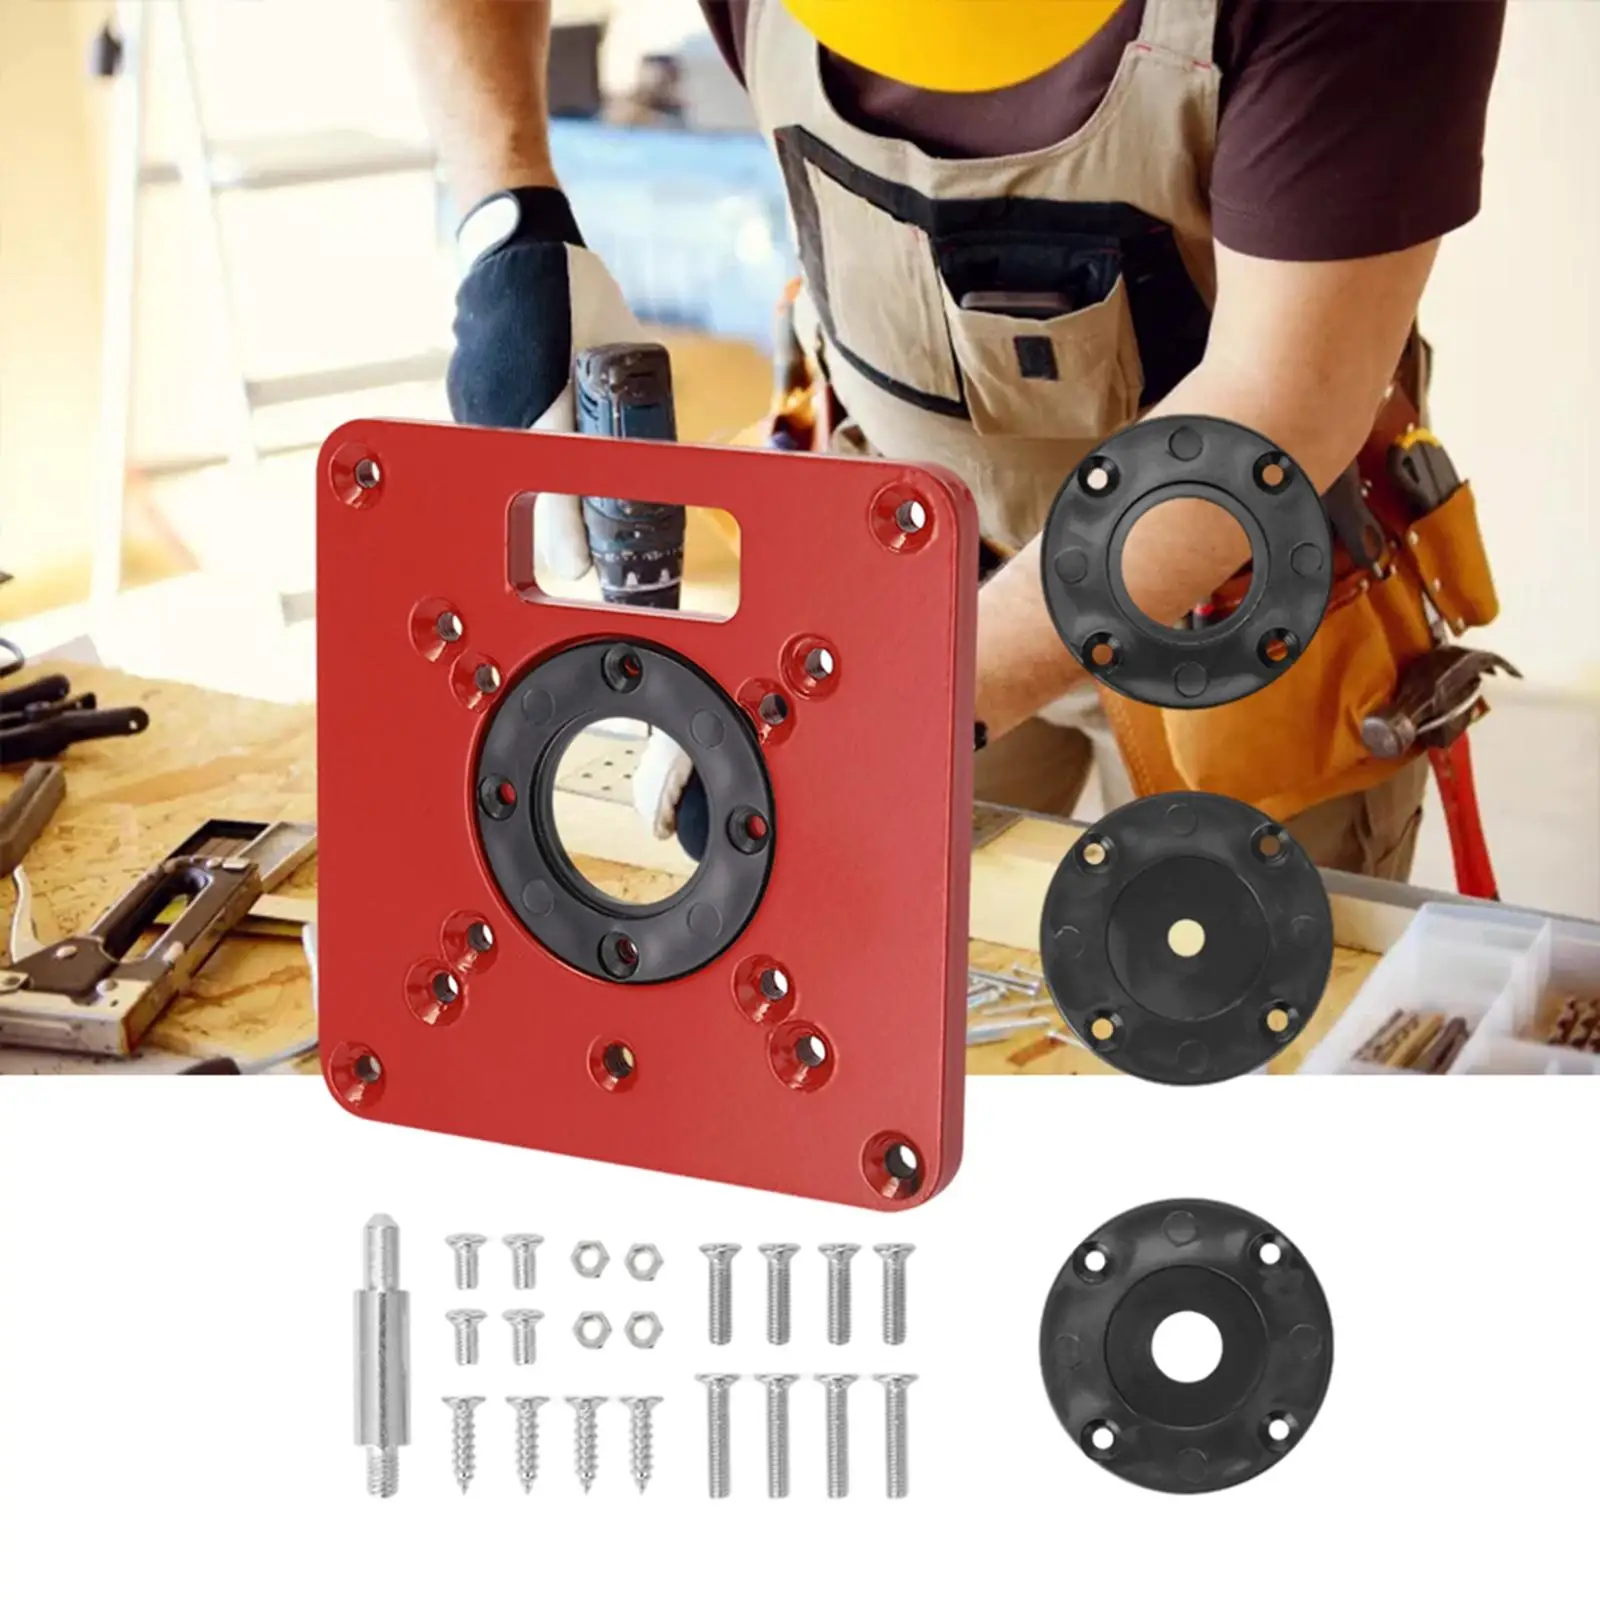 Multi-Functional Router Table Insert Plate with 4 Rings Woodworking Benches for DIY Kit antique woodworking bench